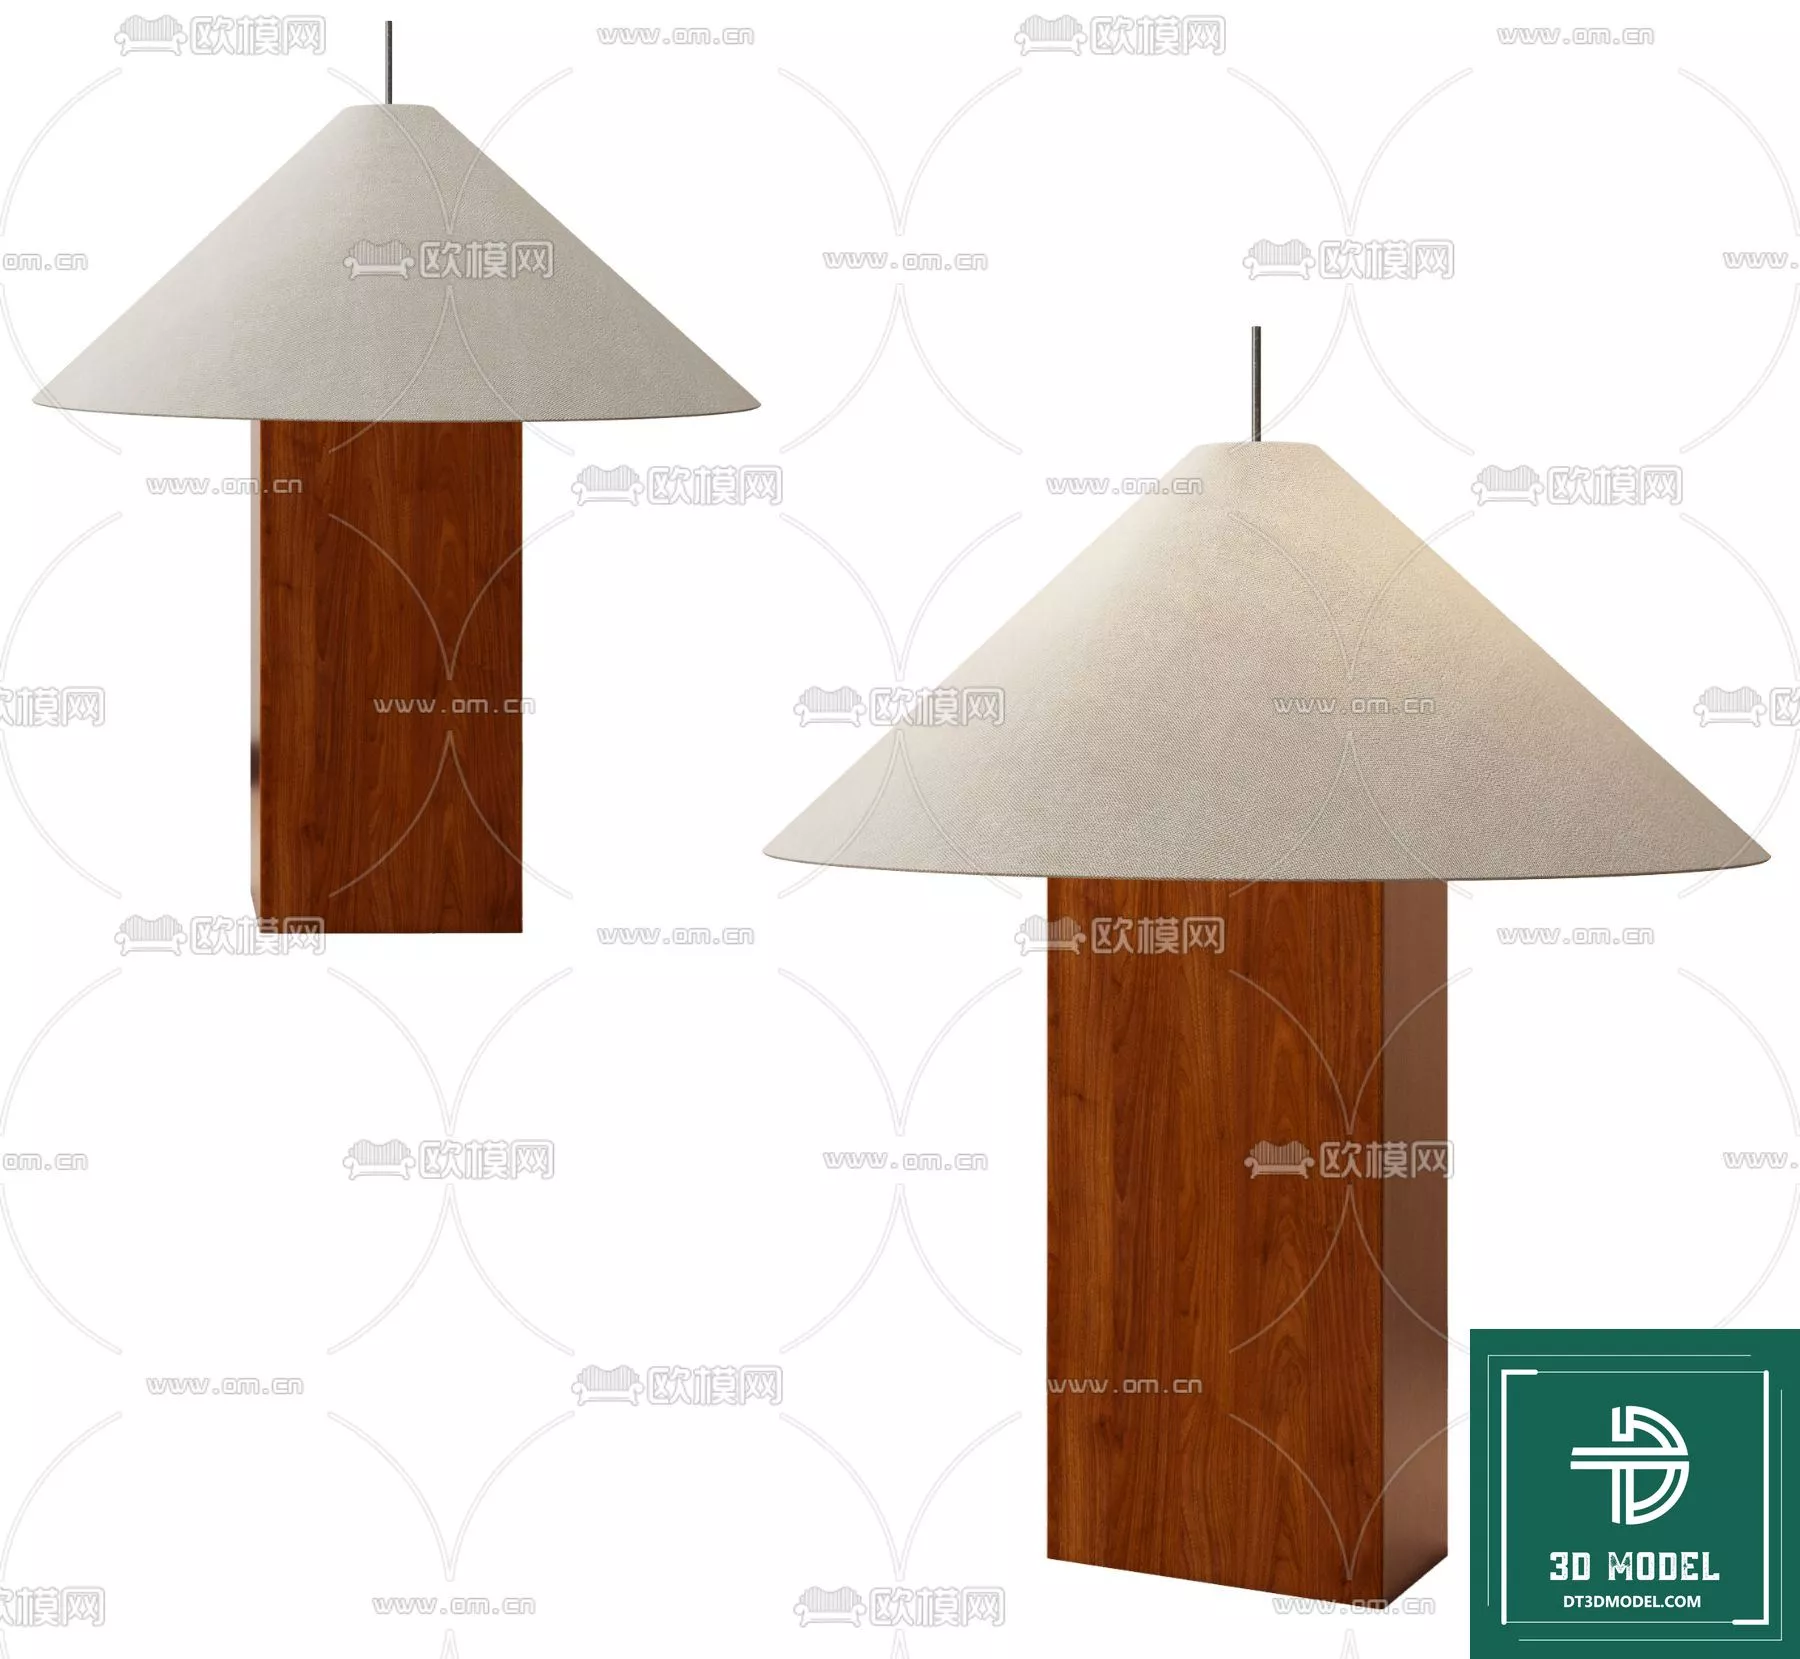 MODERN TABLE LAMP - SKETCHUP 3D MODEL - VRAY OR ENSCAPE - ID14607